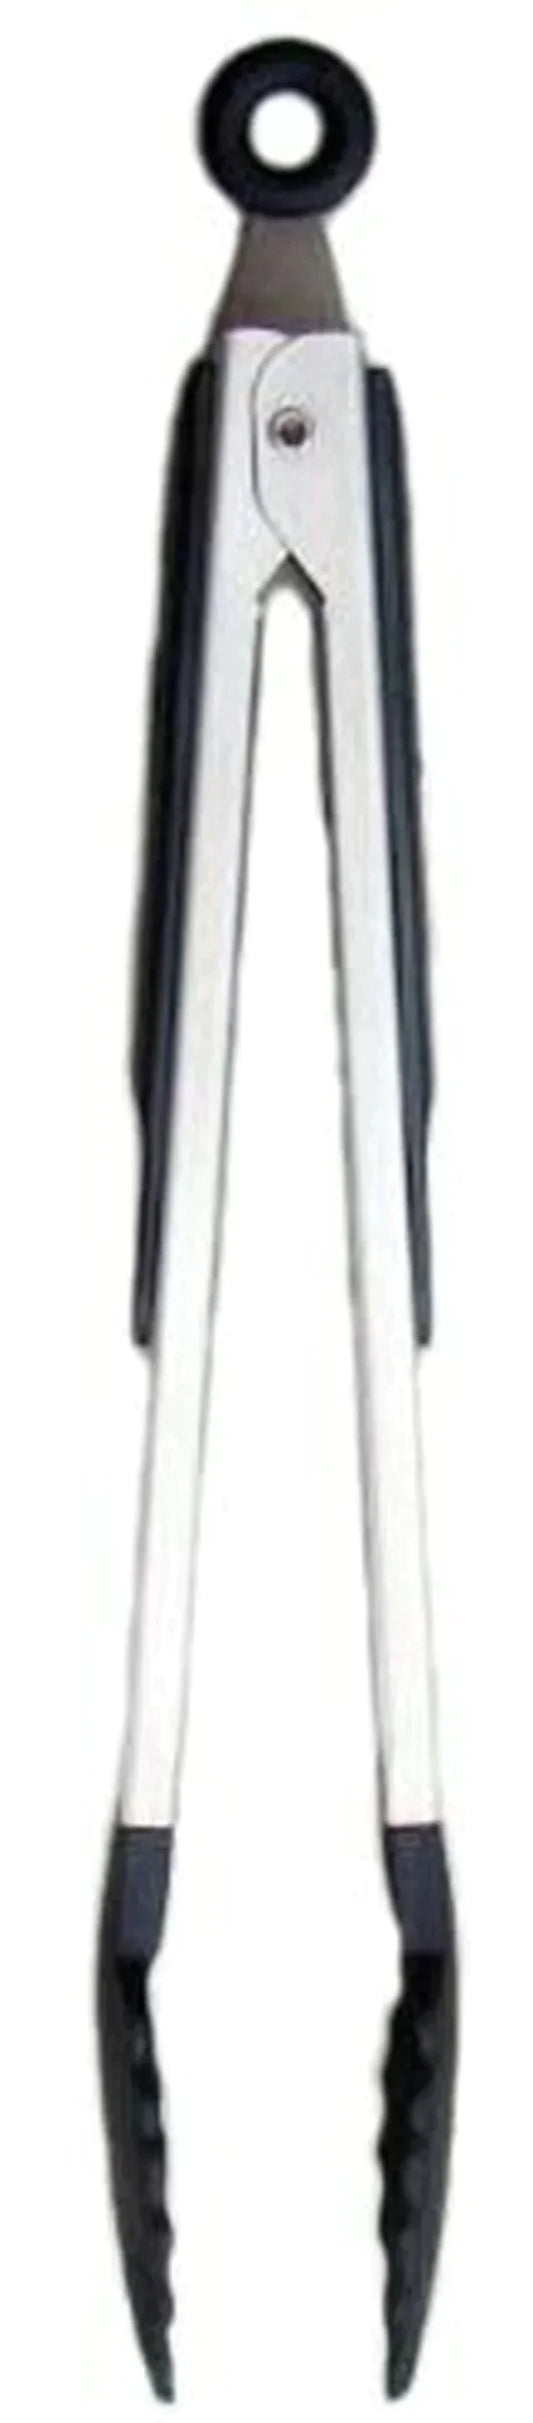 12-INCH SPATULA TIP SERVING TONGS In Pakistan